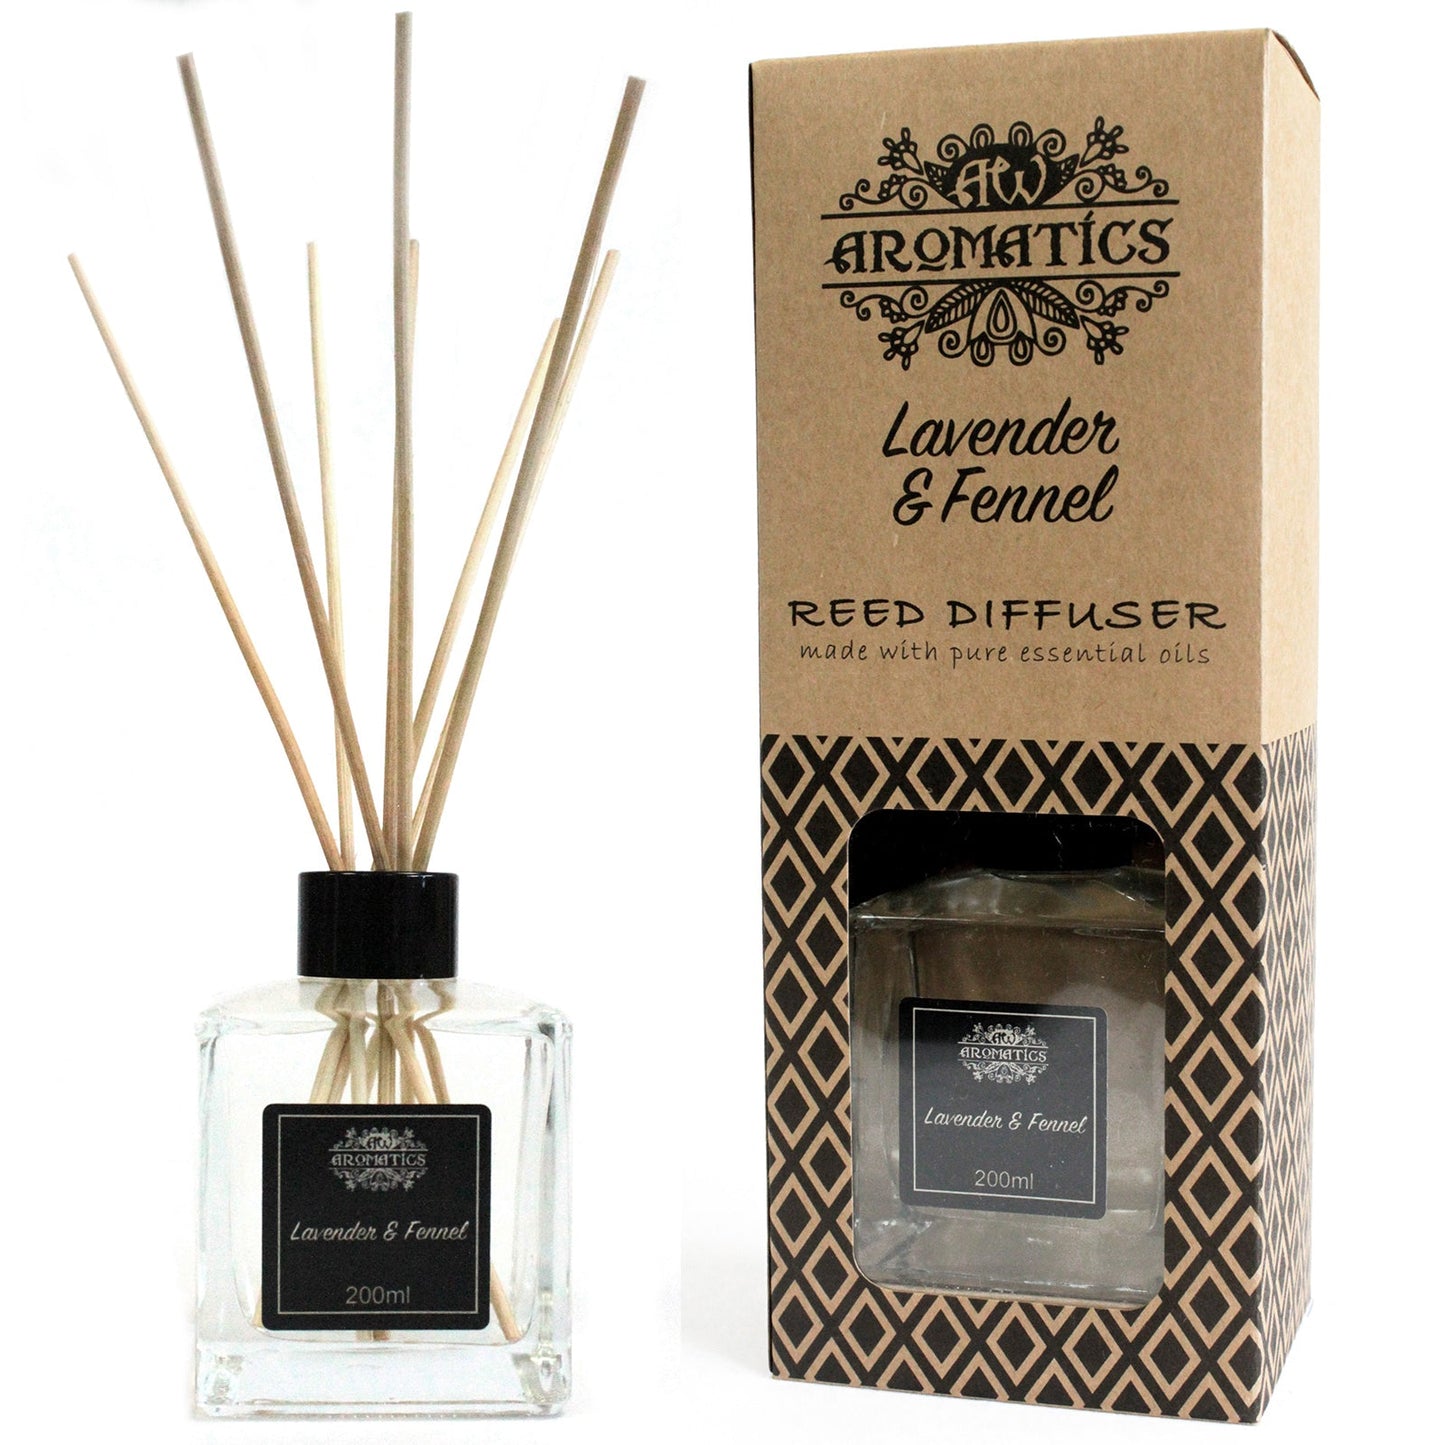 Luxury Essential Oils Reed Diffuser - Various Blends Pure Essential Oils Reed Diffusers Soul Inspired Lavender & Fennel 